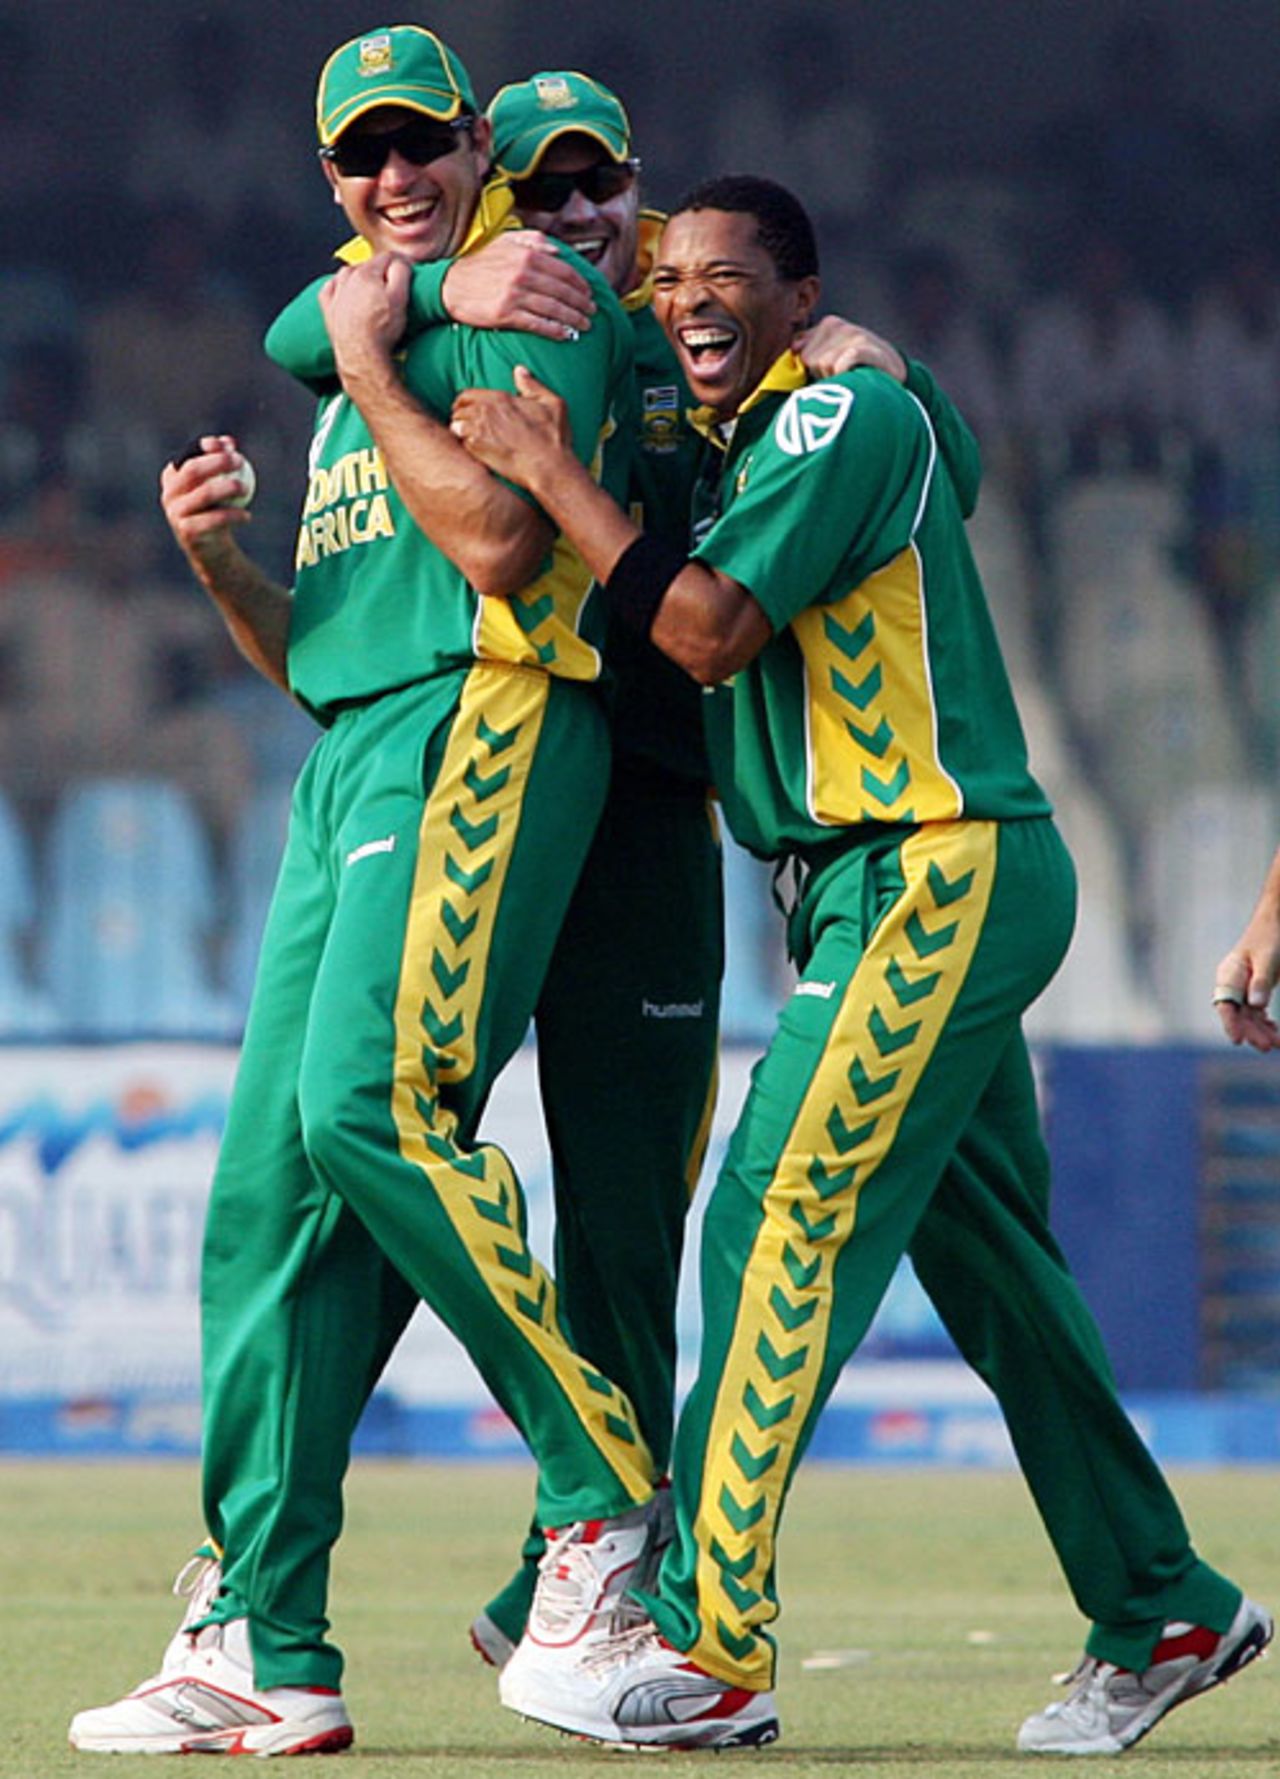 Justin Kemp took a stunning catch to dismiss Imran Nazir, Pakistan v South Africa, 1st ODI, Lahore, October 18, 2007